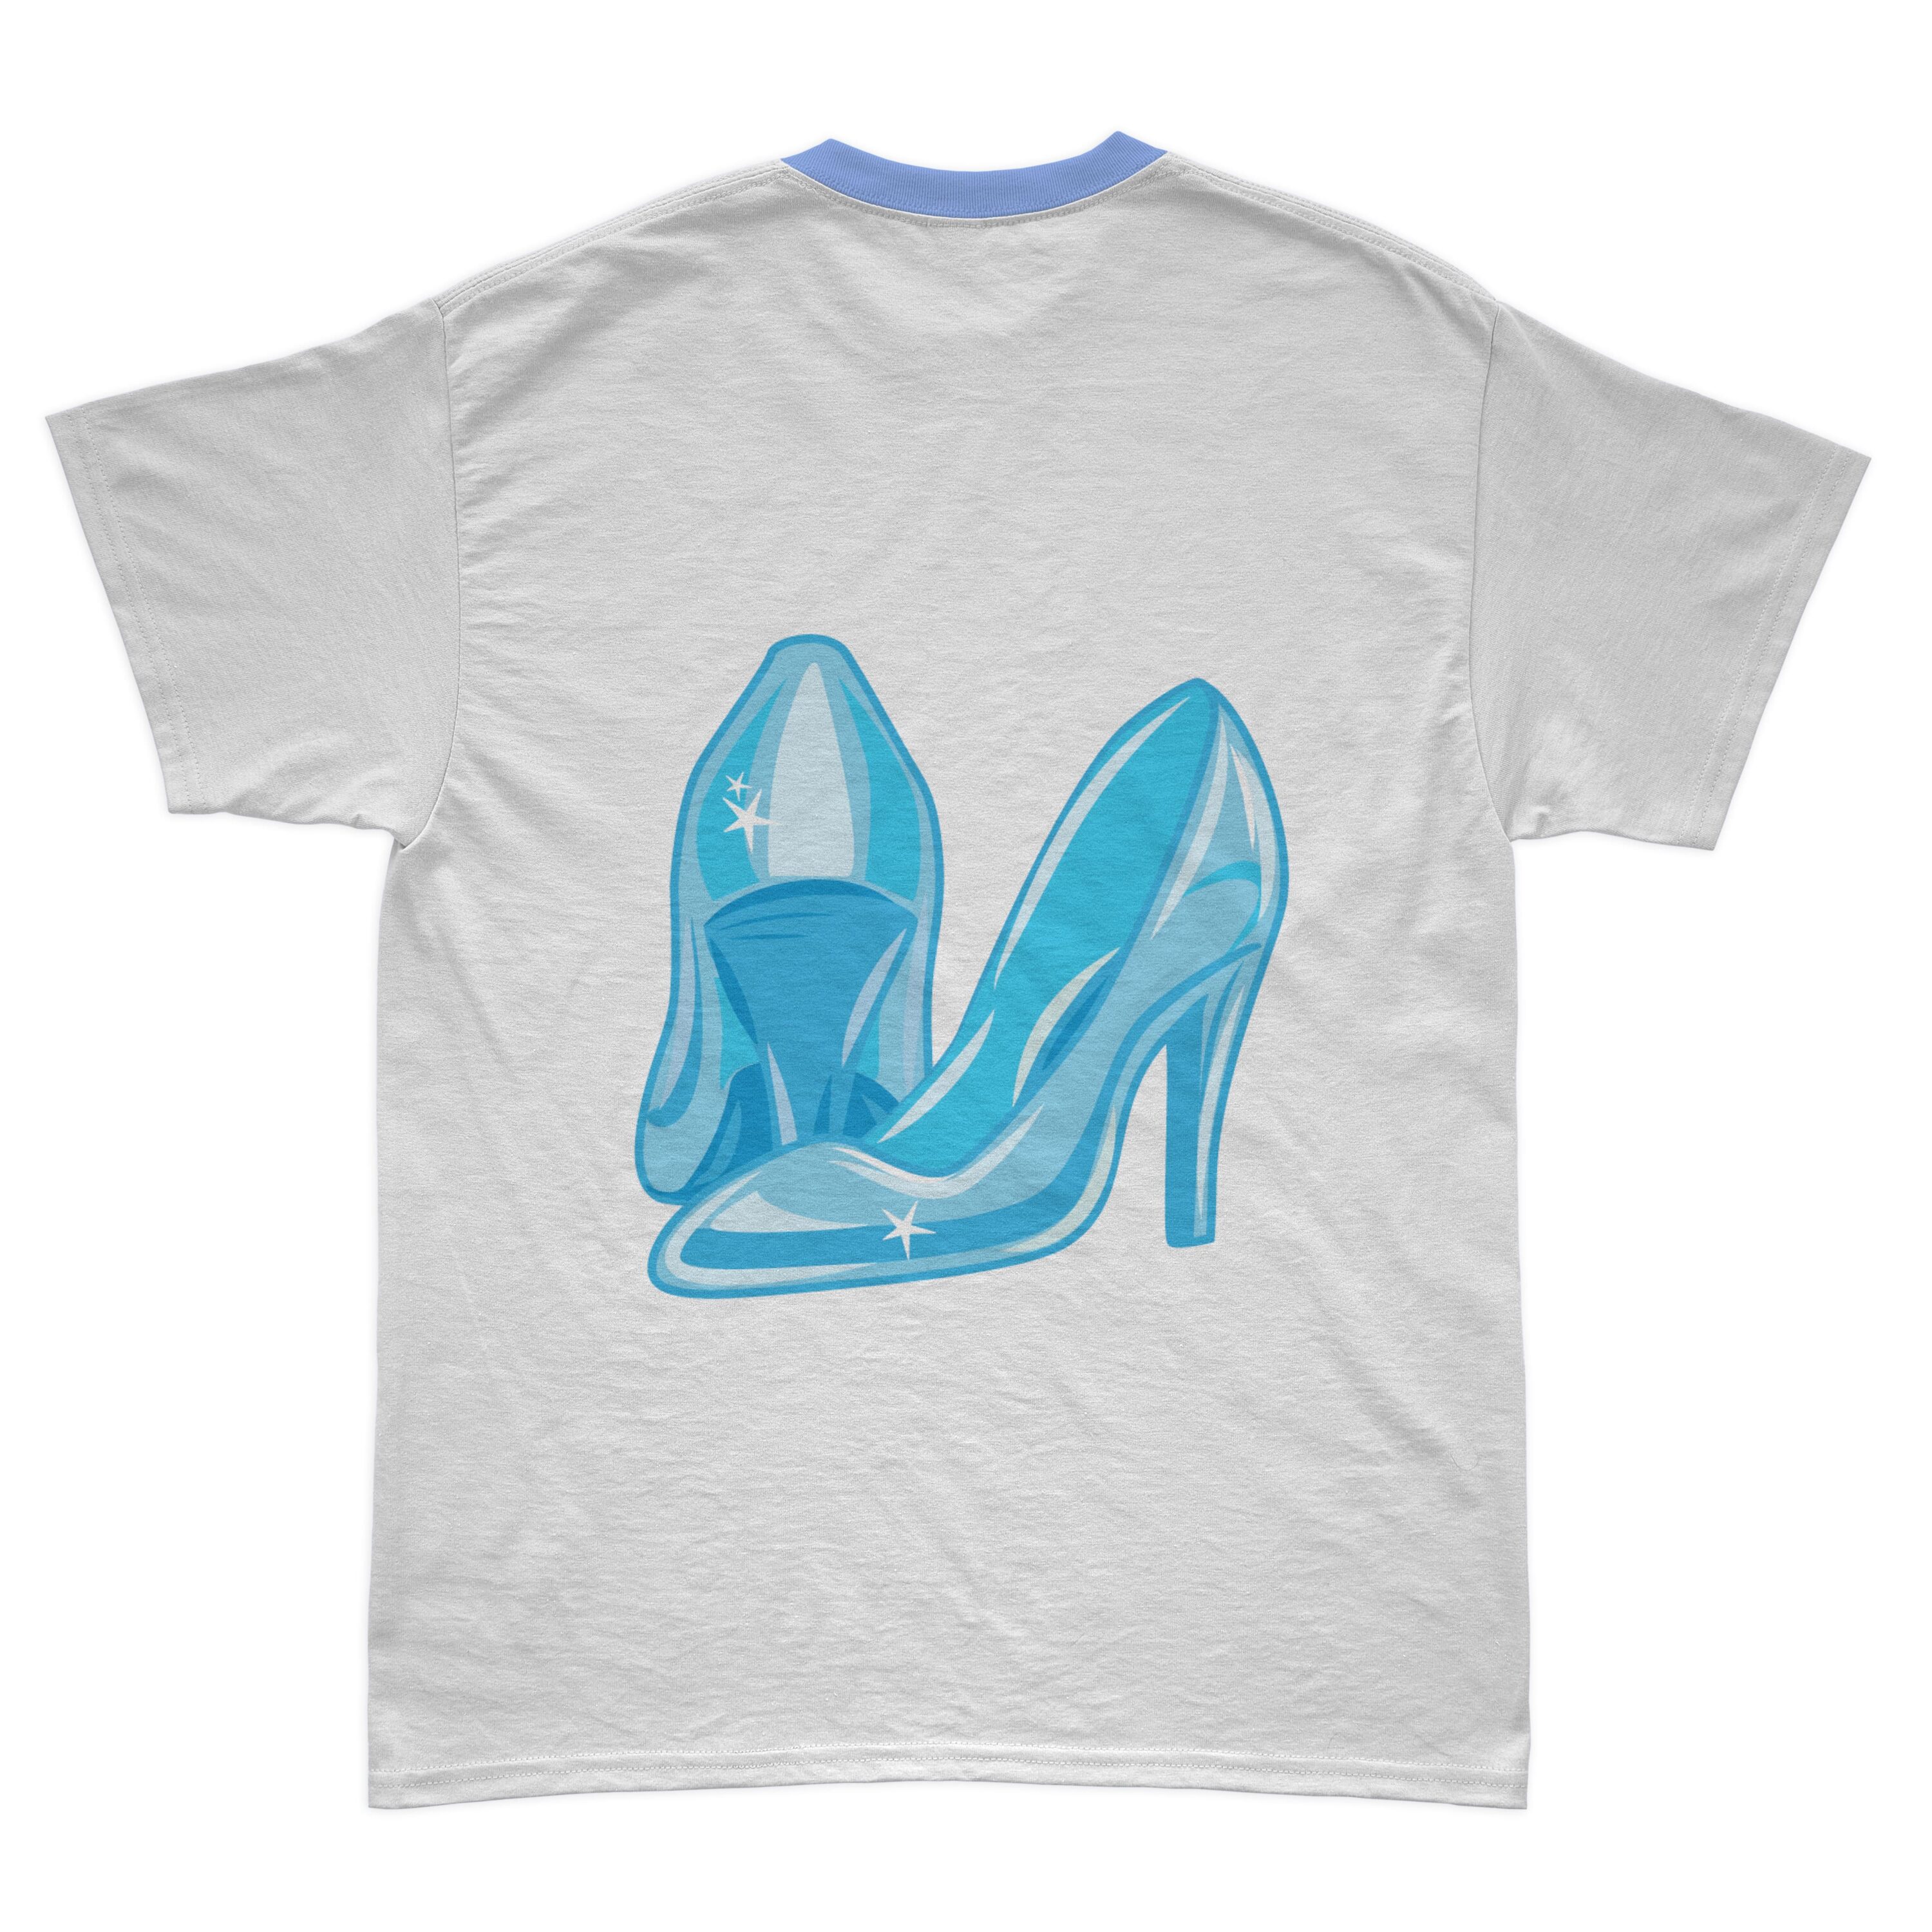 Image of a white t-shirt with a colorful print of Cinderella's shoes.